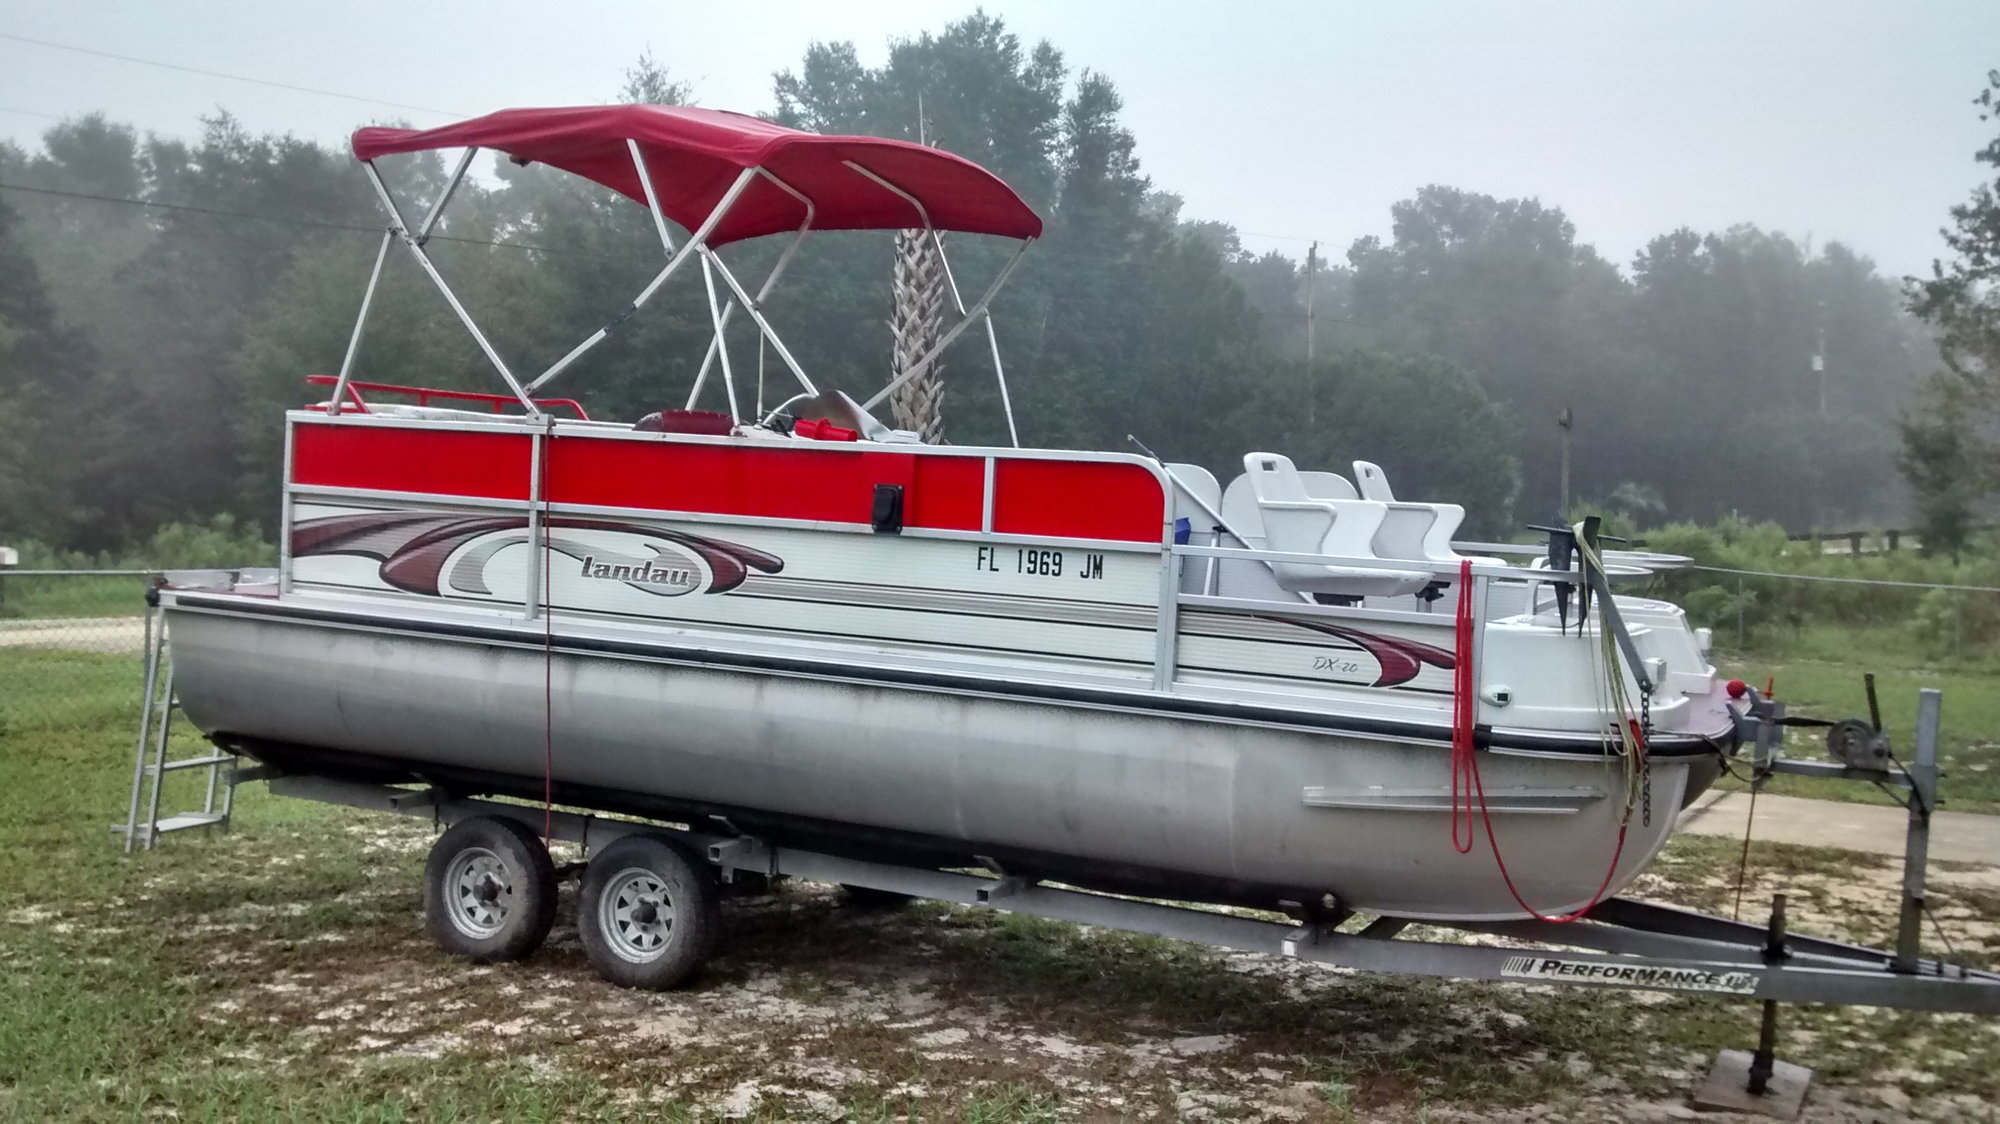 New to me Pontoon boat - Suggestions? - The Hull Truth - Boating and  Fishing Forum